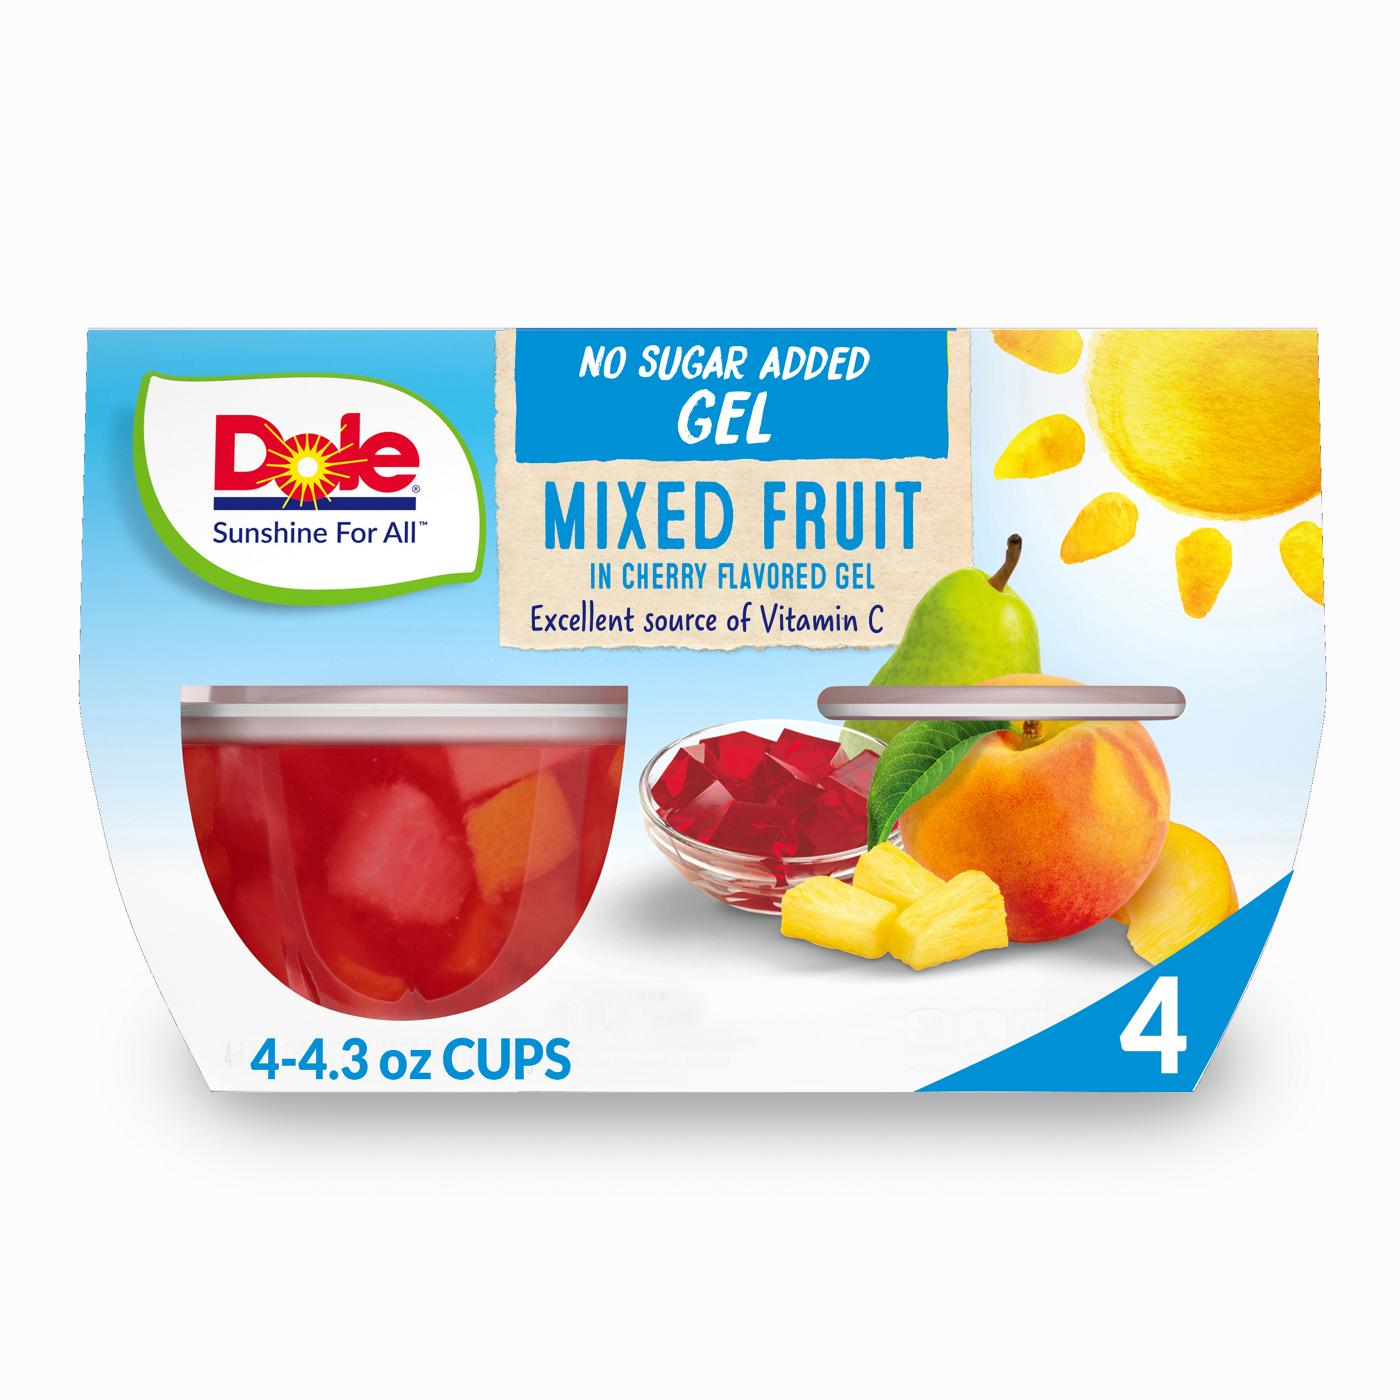 Dole Fruit Bowls - Mixed Fruit in No Sugar Added Cherry Flavored Gel; image 1 of 2